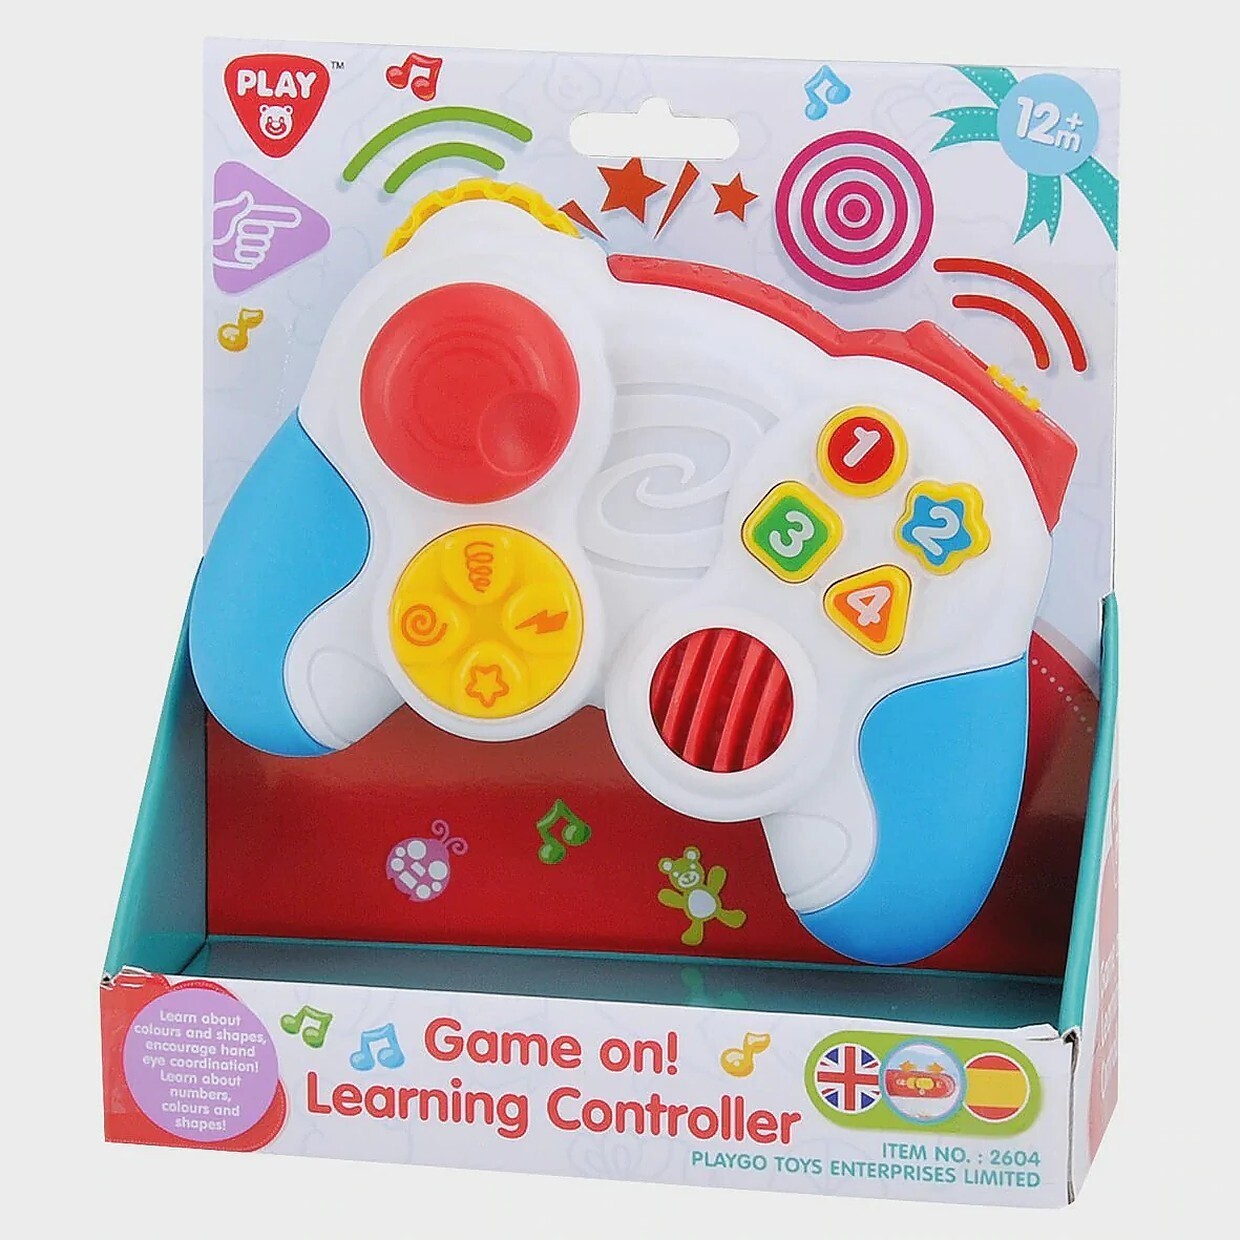 Playgo Game On! Learning Controller Toy for age 6m+